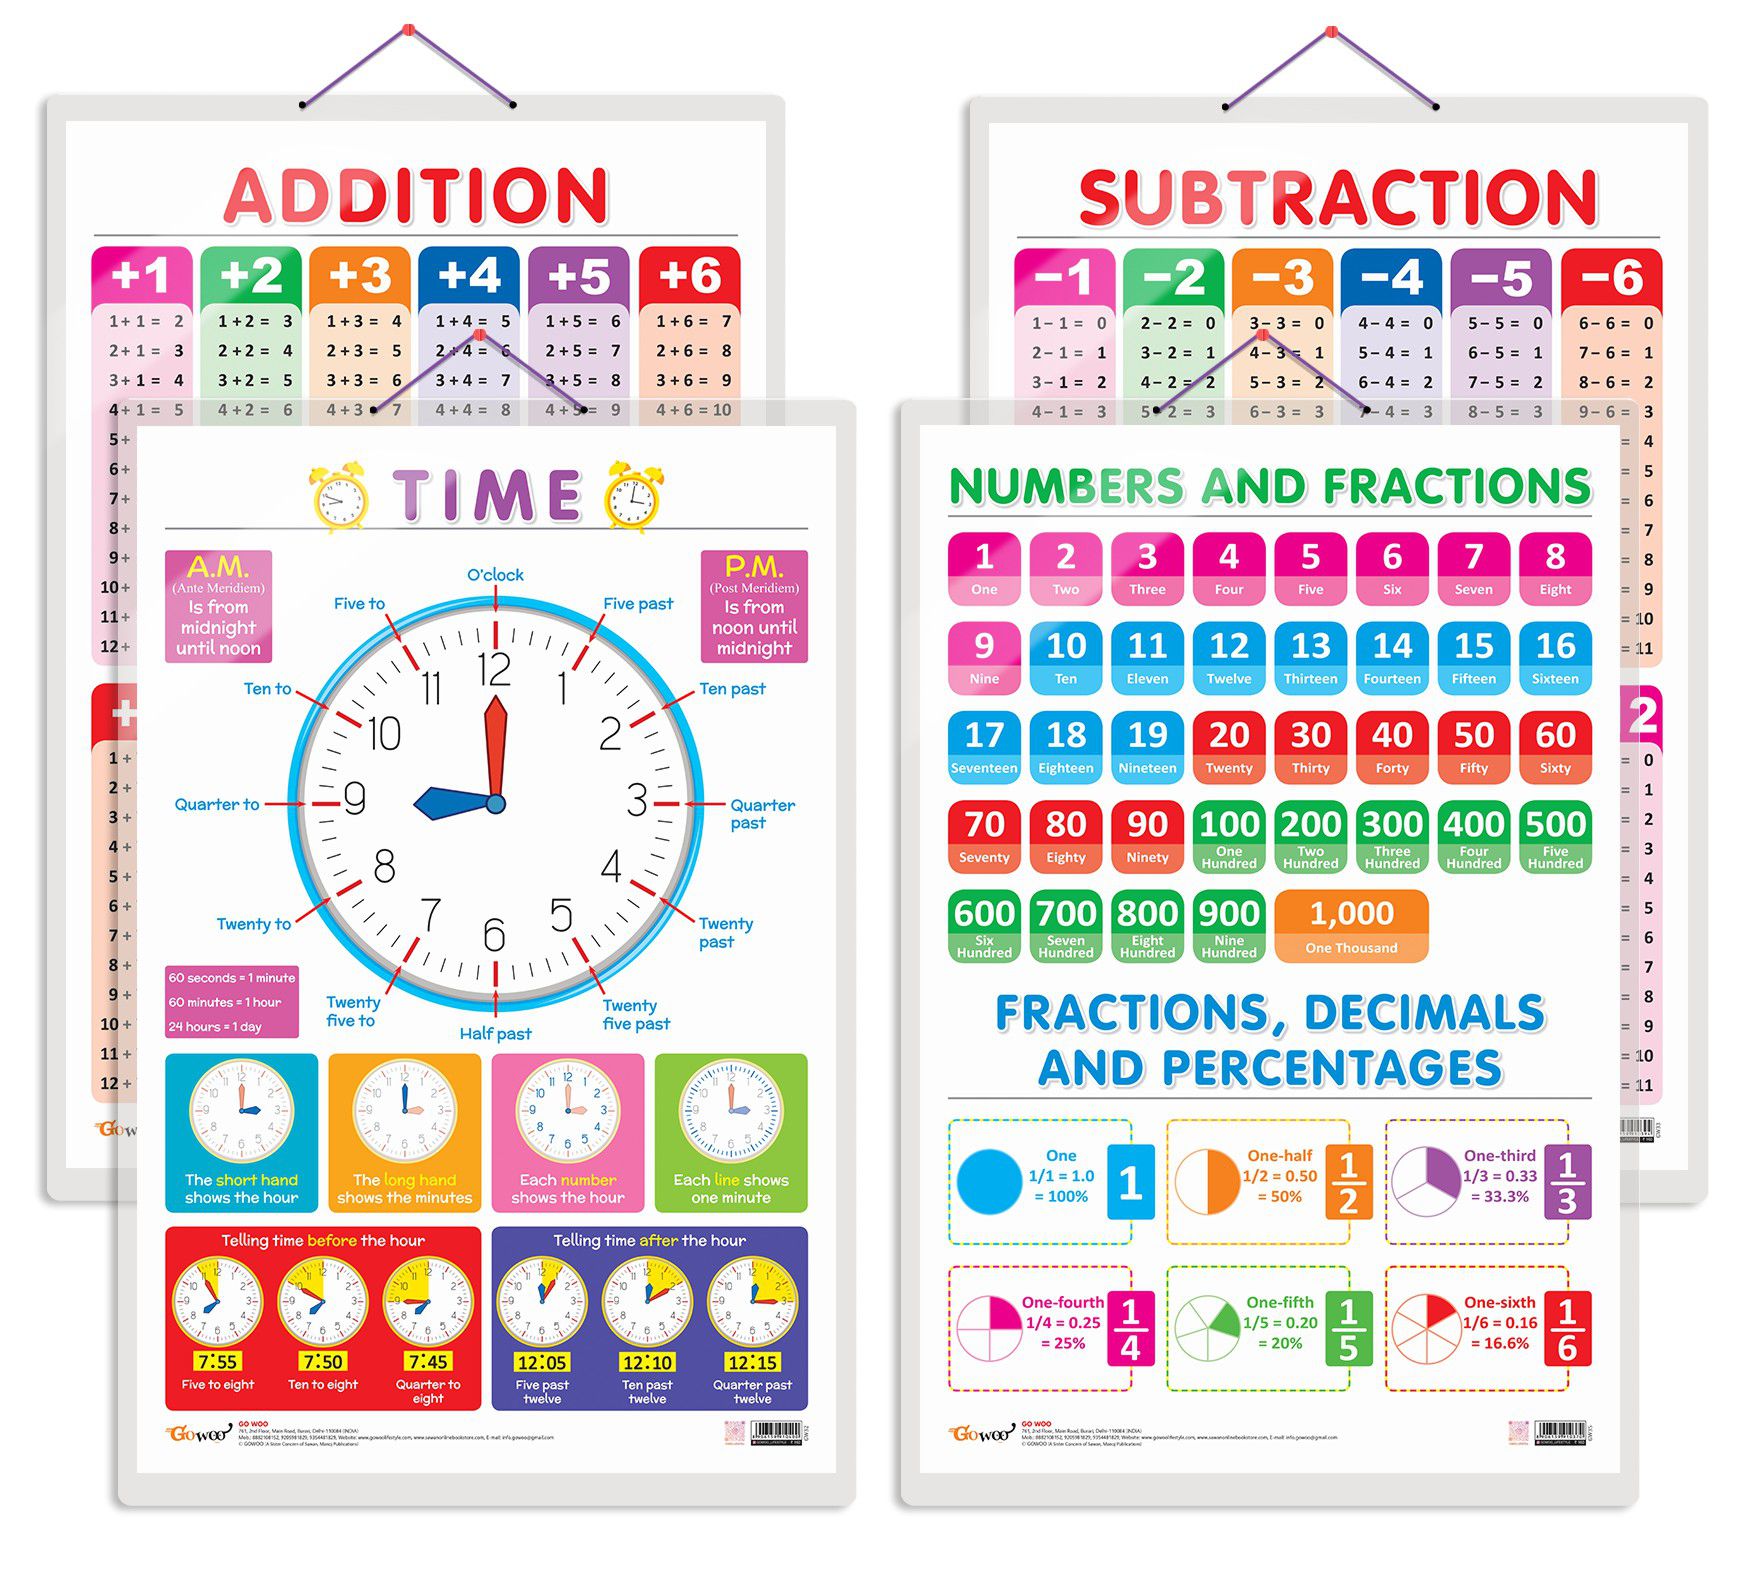     			Set of 4 TIME, SUBTRACTIONm, ADDITION and NUMBERS AND FRACTIONS Early Learning Educational Charts for Kids | 20"X30" inch |Non-Tearable and Waterproof | Double Sided Laminated | Perfect for Homeschooling, Kindergarten and Nursery Students